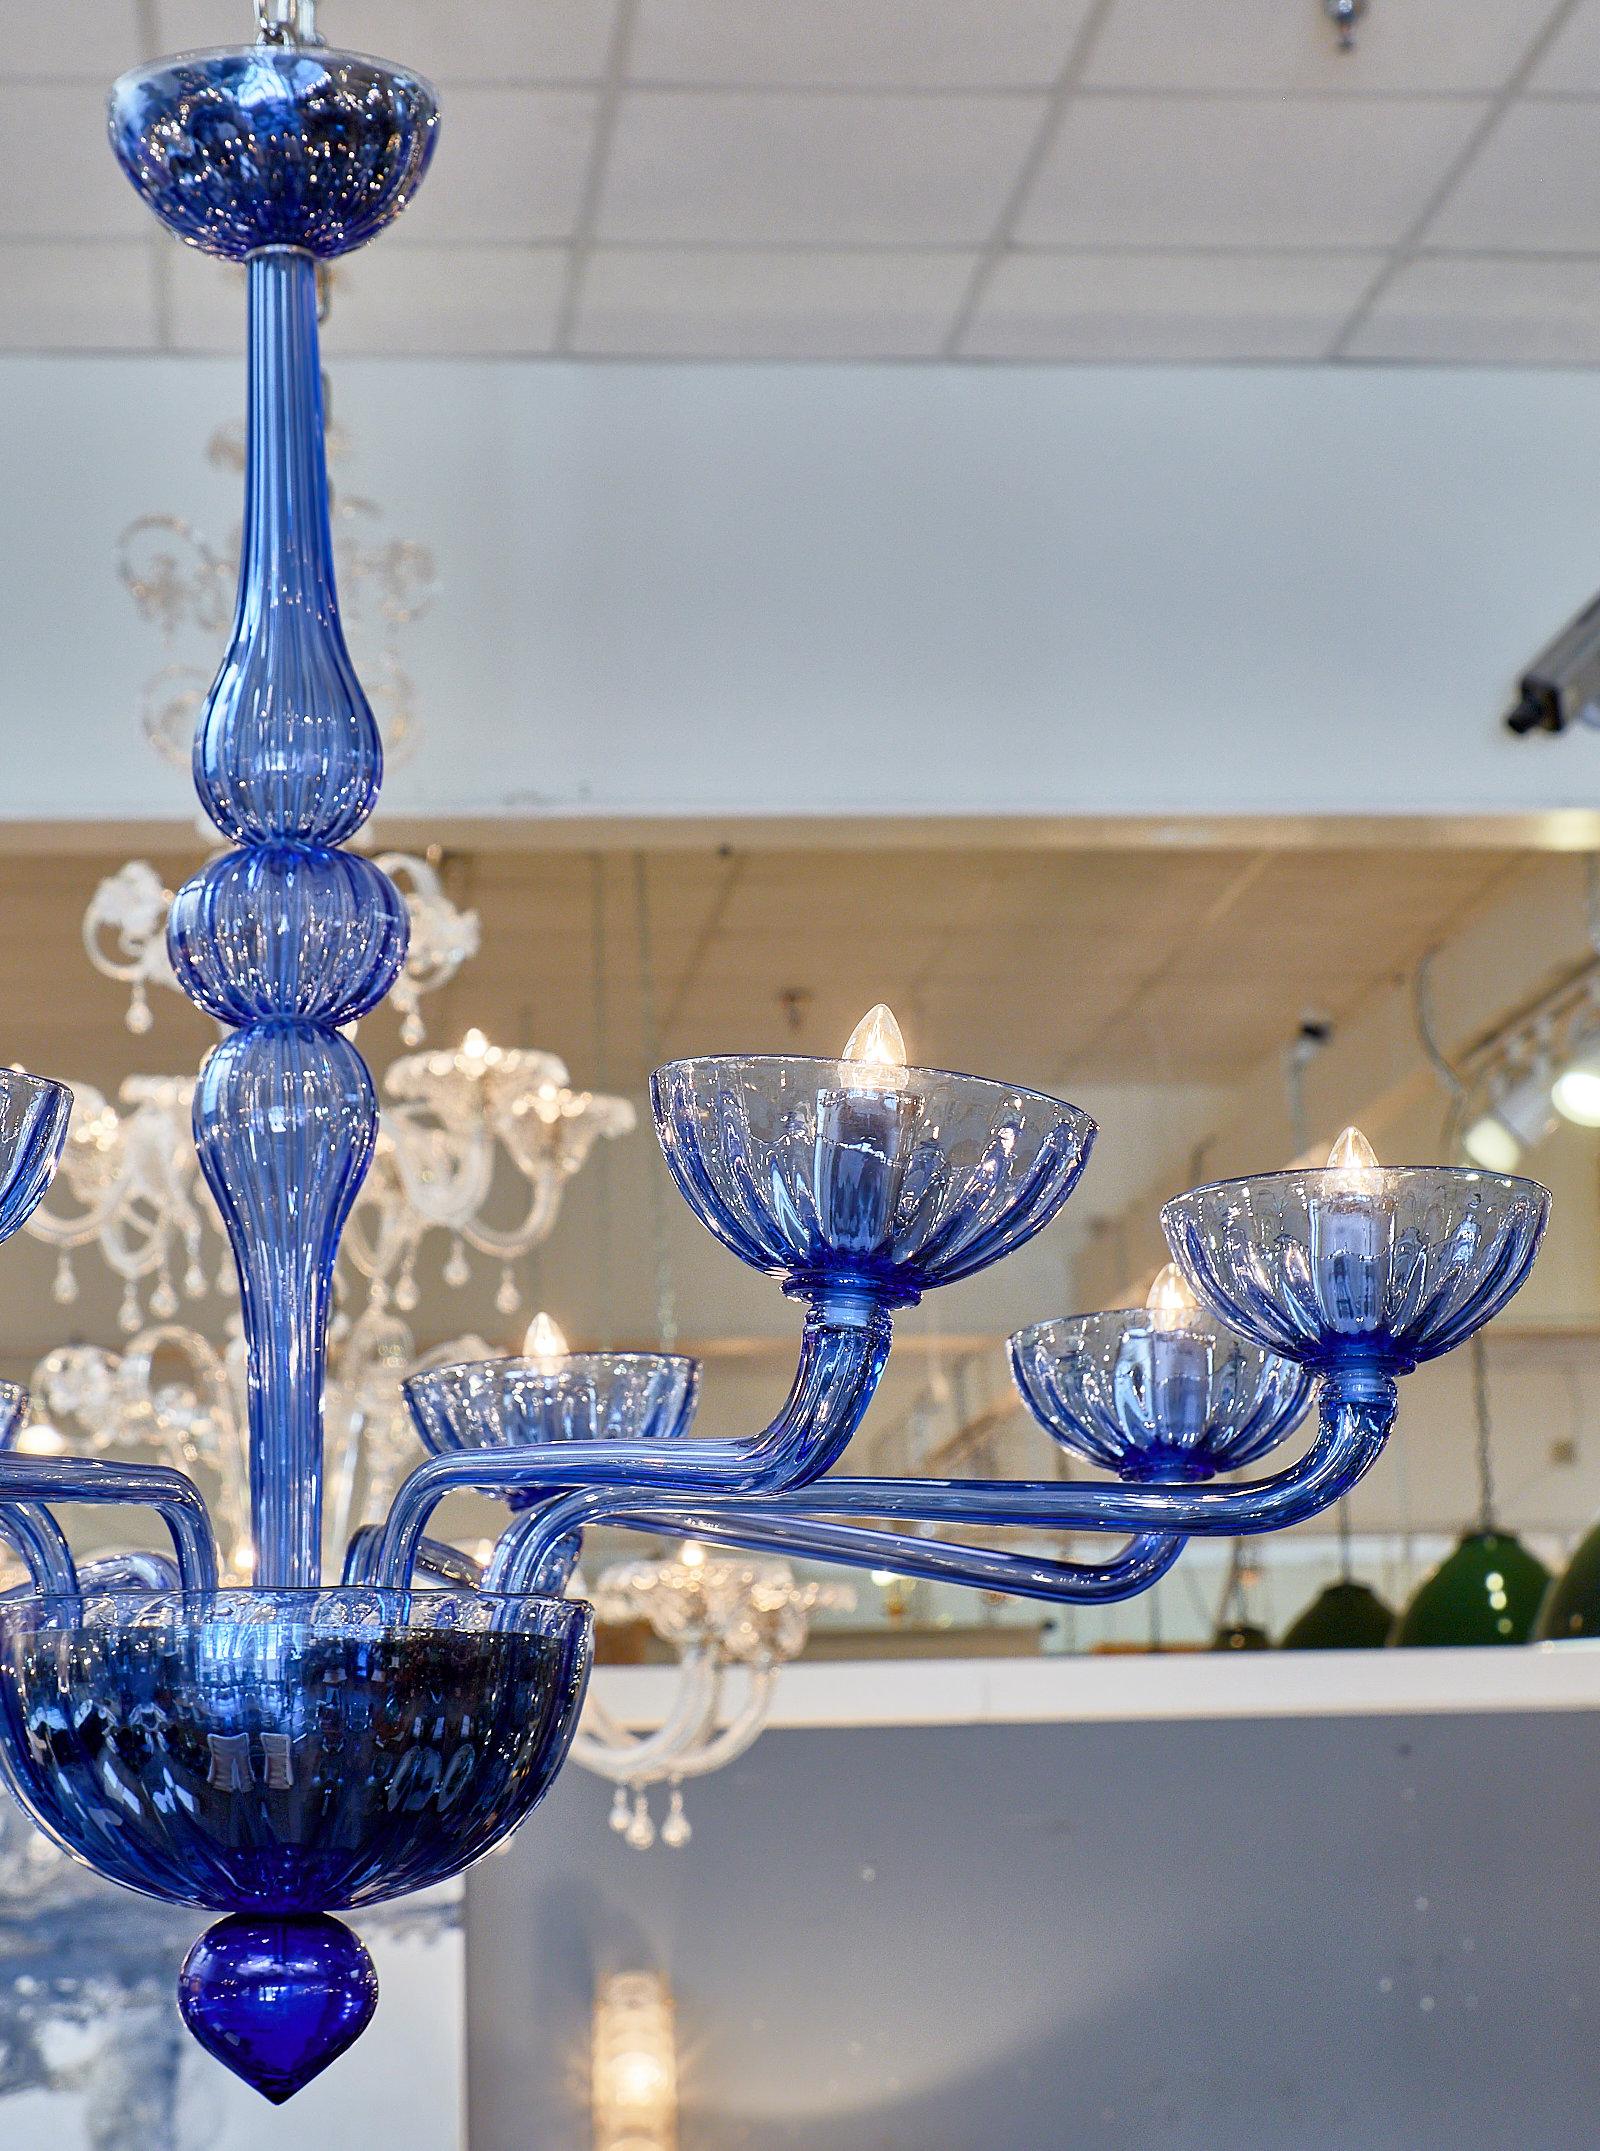 Blue Murano glass chandelier featuring ten branches, large bobeches, and a blown glass stem.